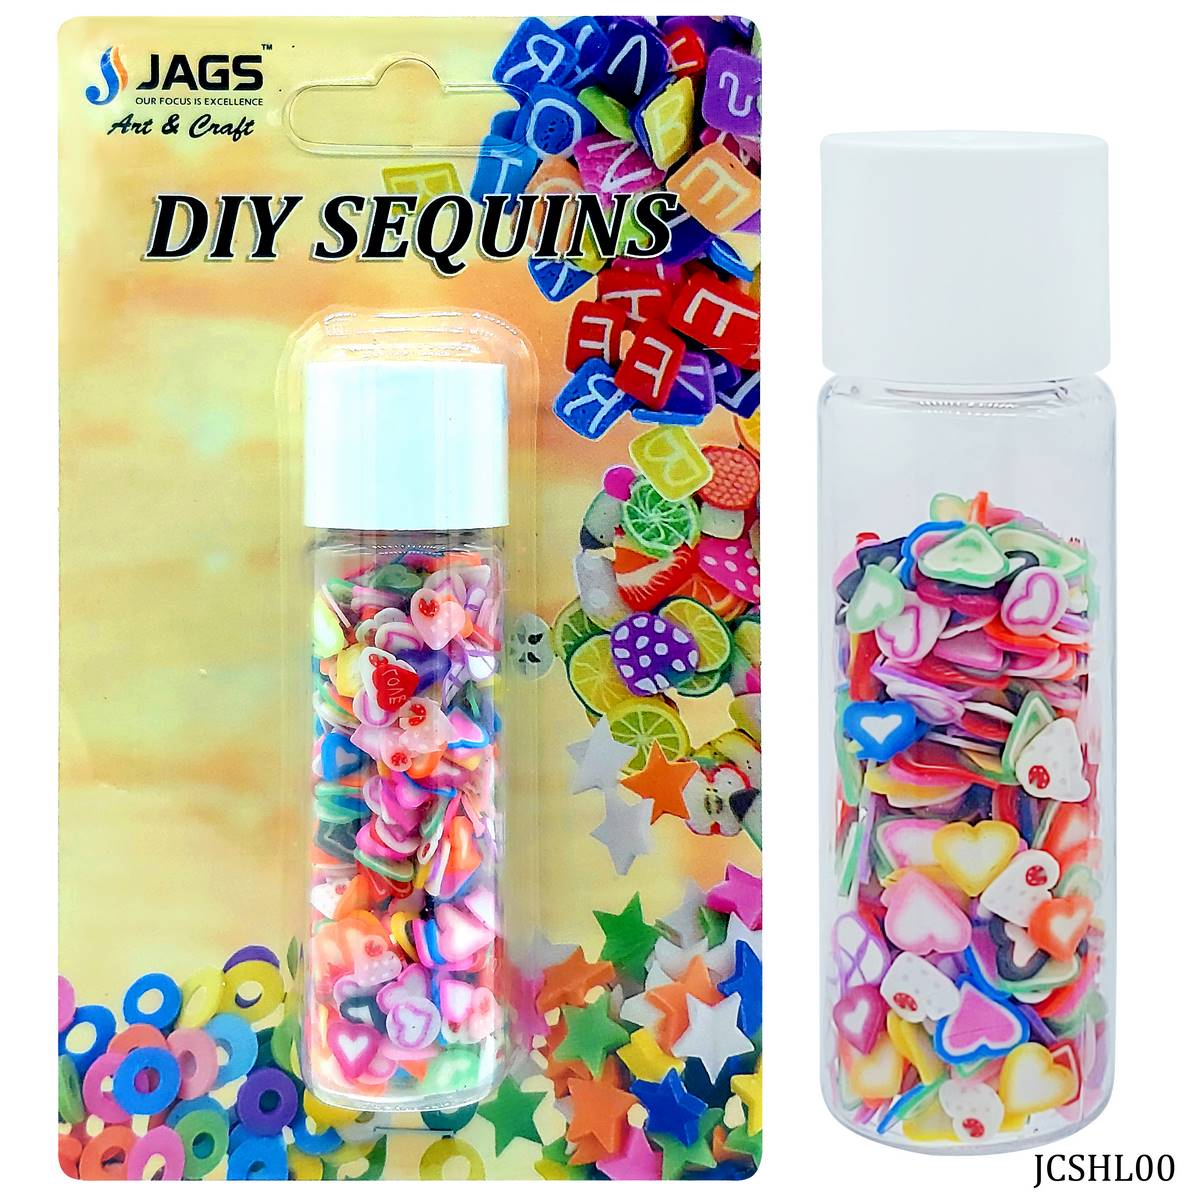 jags-mumbai Sequin Sequins, shakers for resin Heart